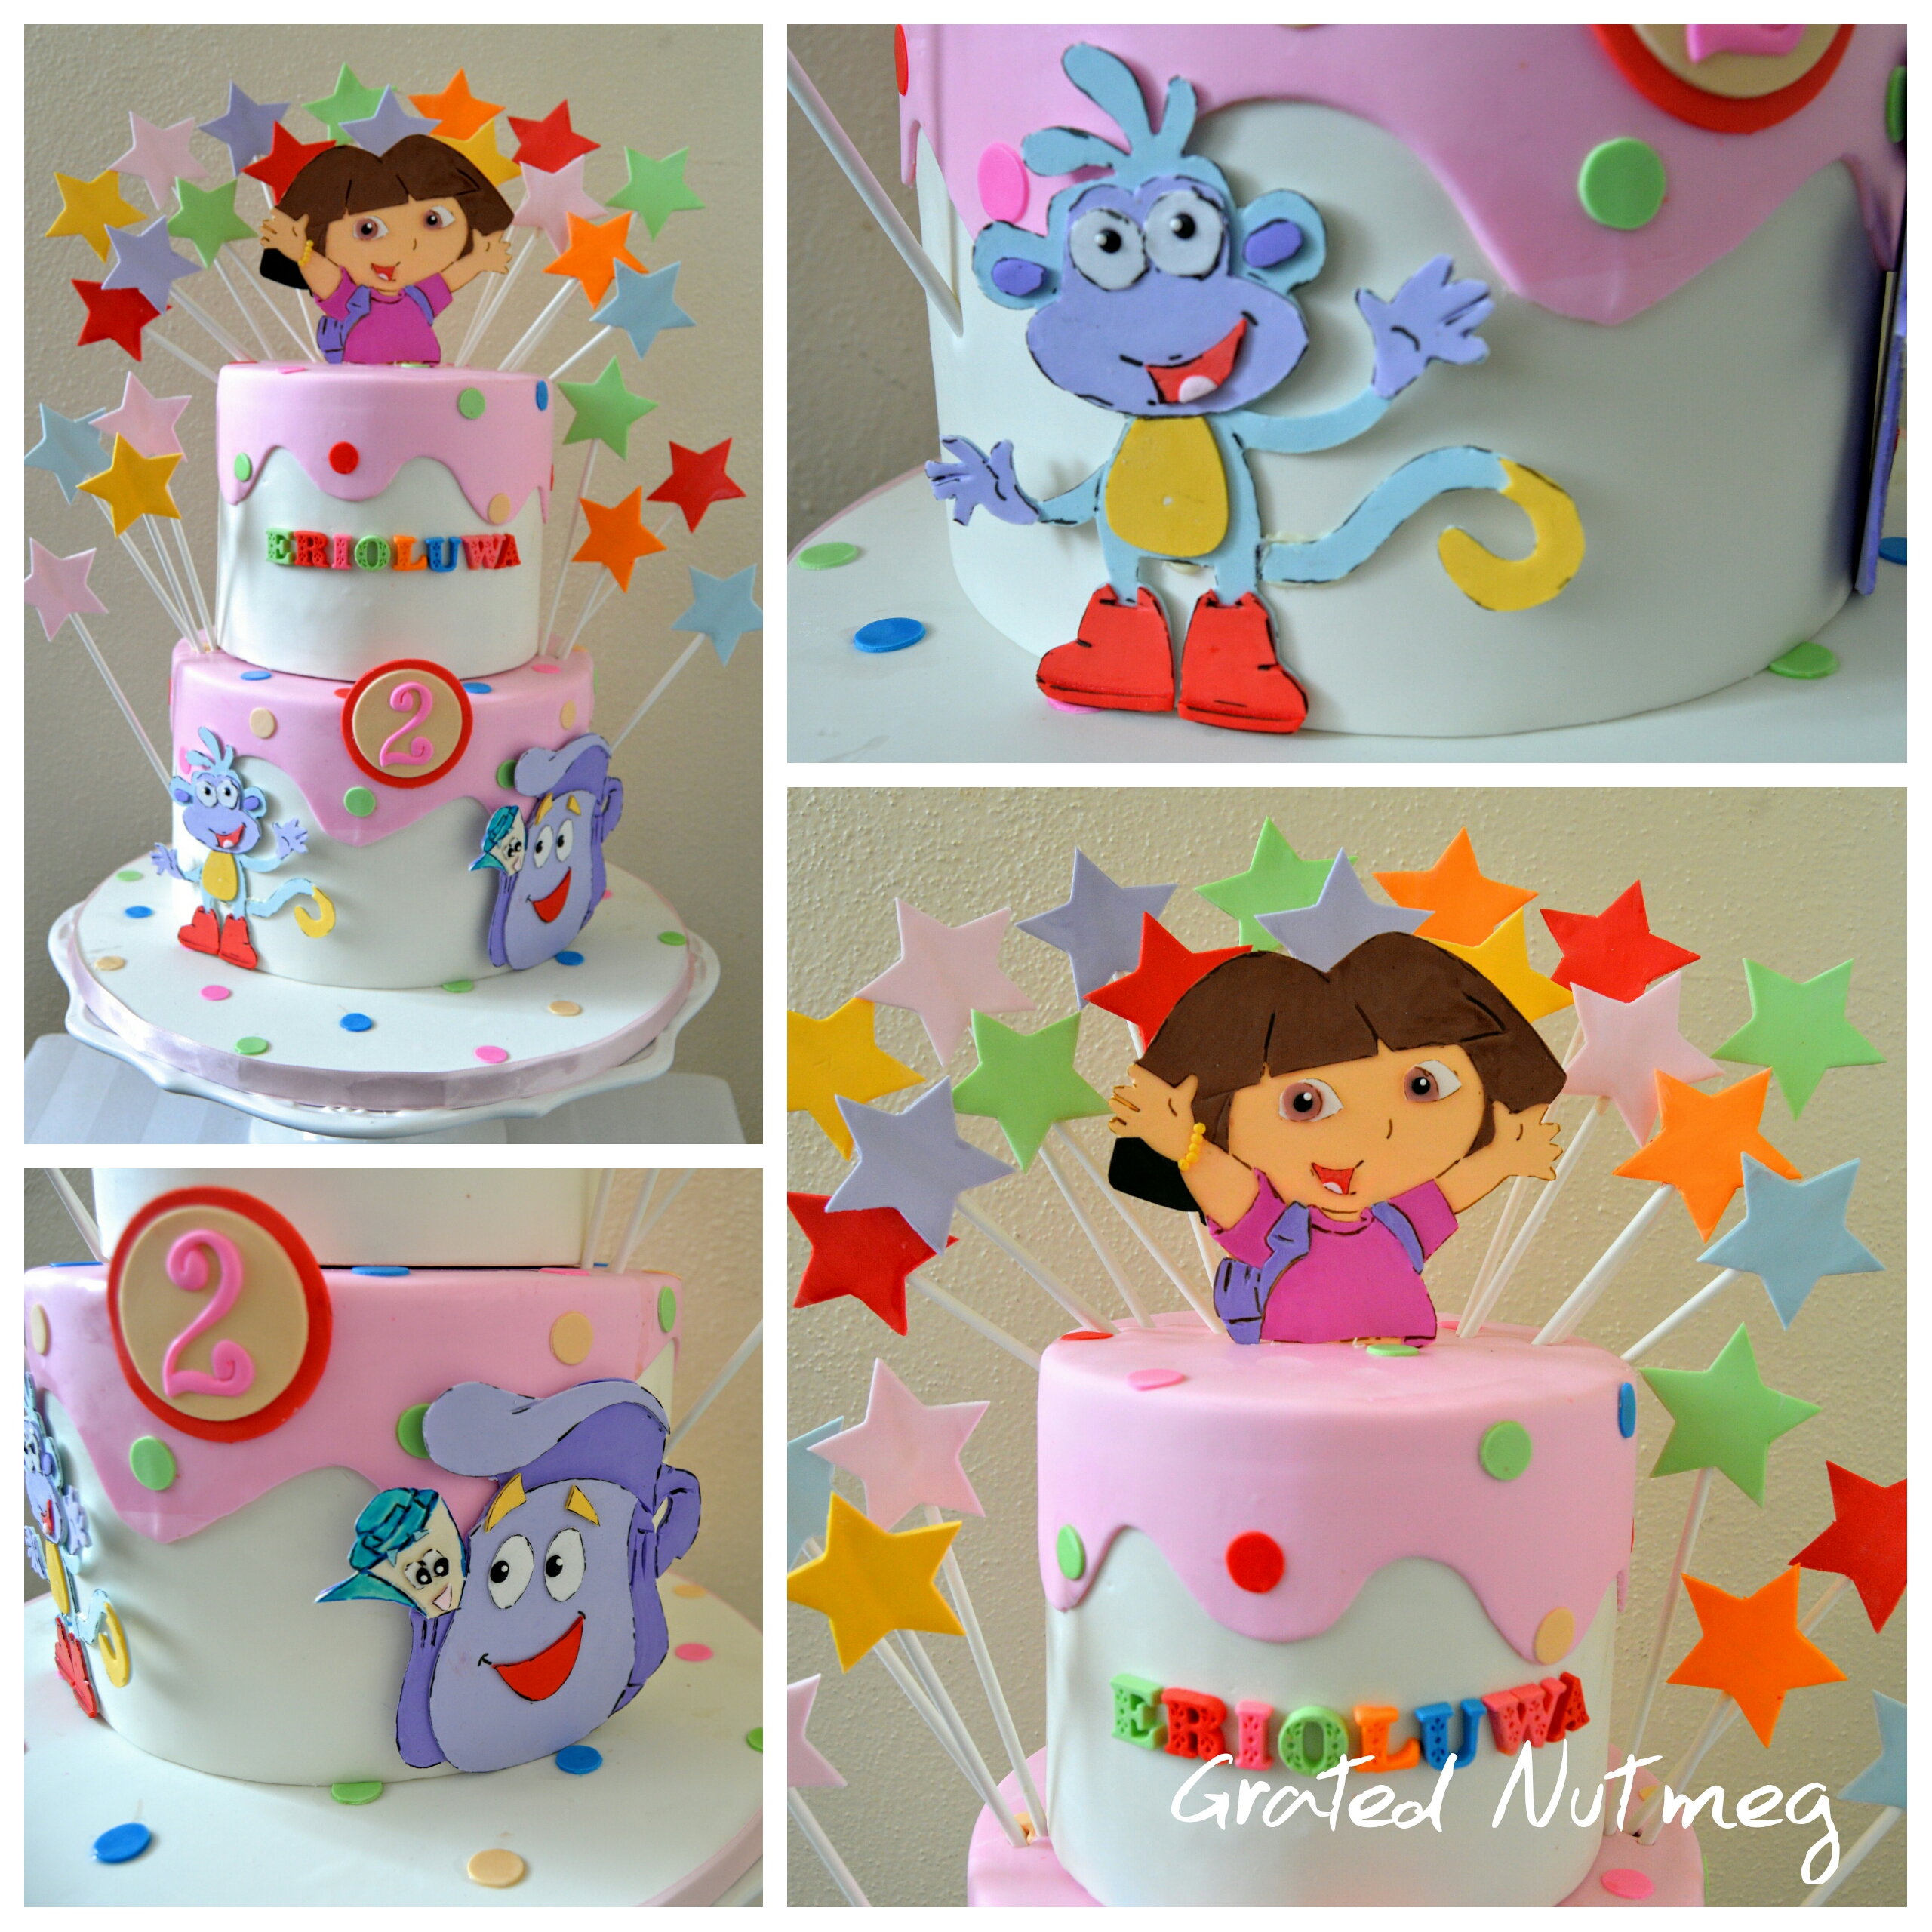 The Making of a Dora The Explorer Tiered Cake